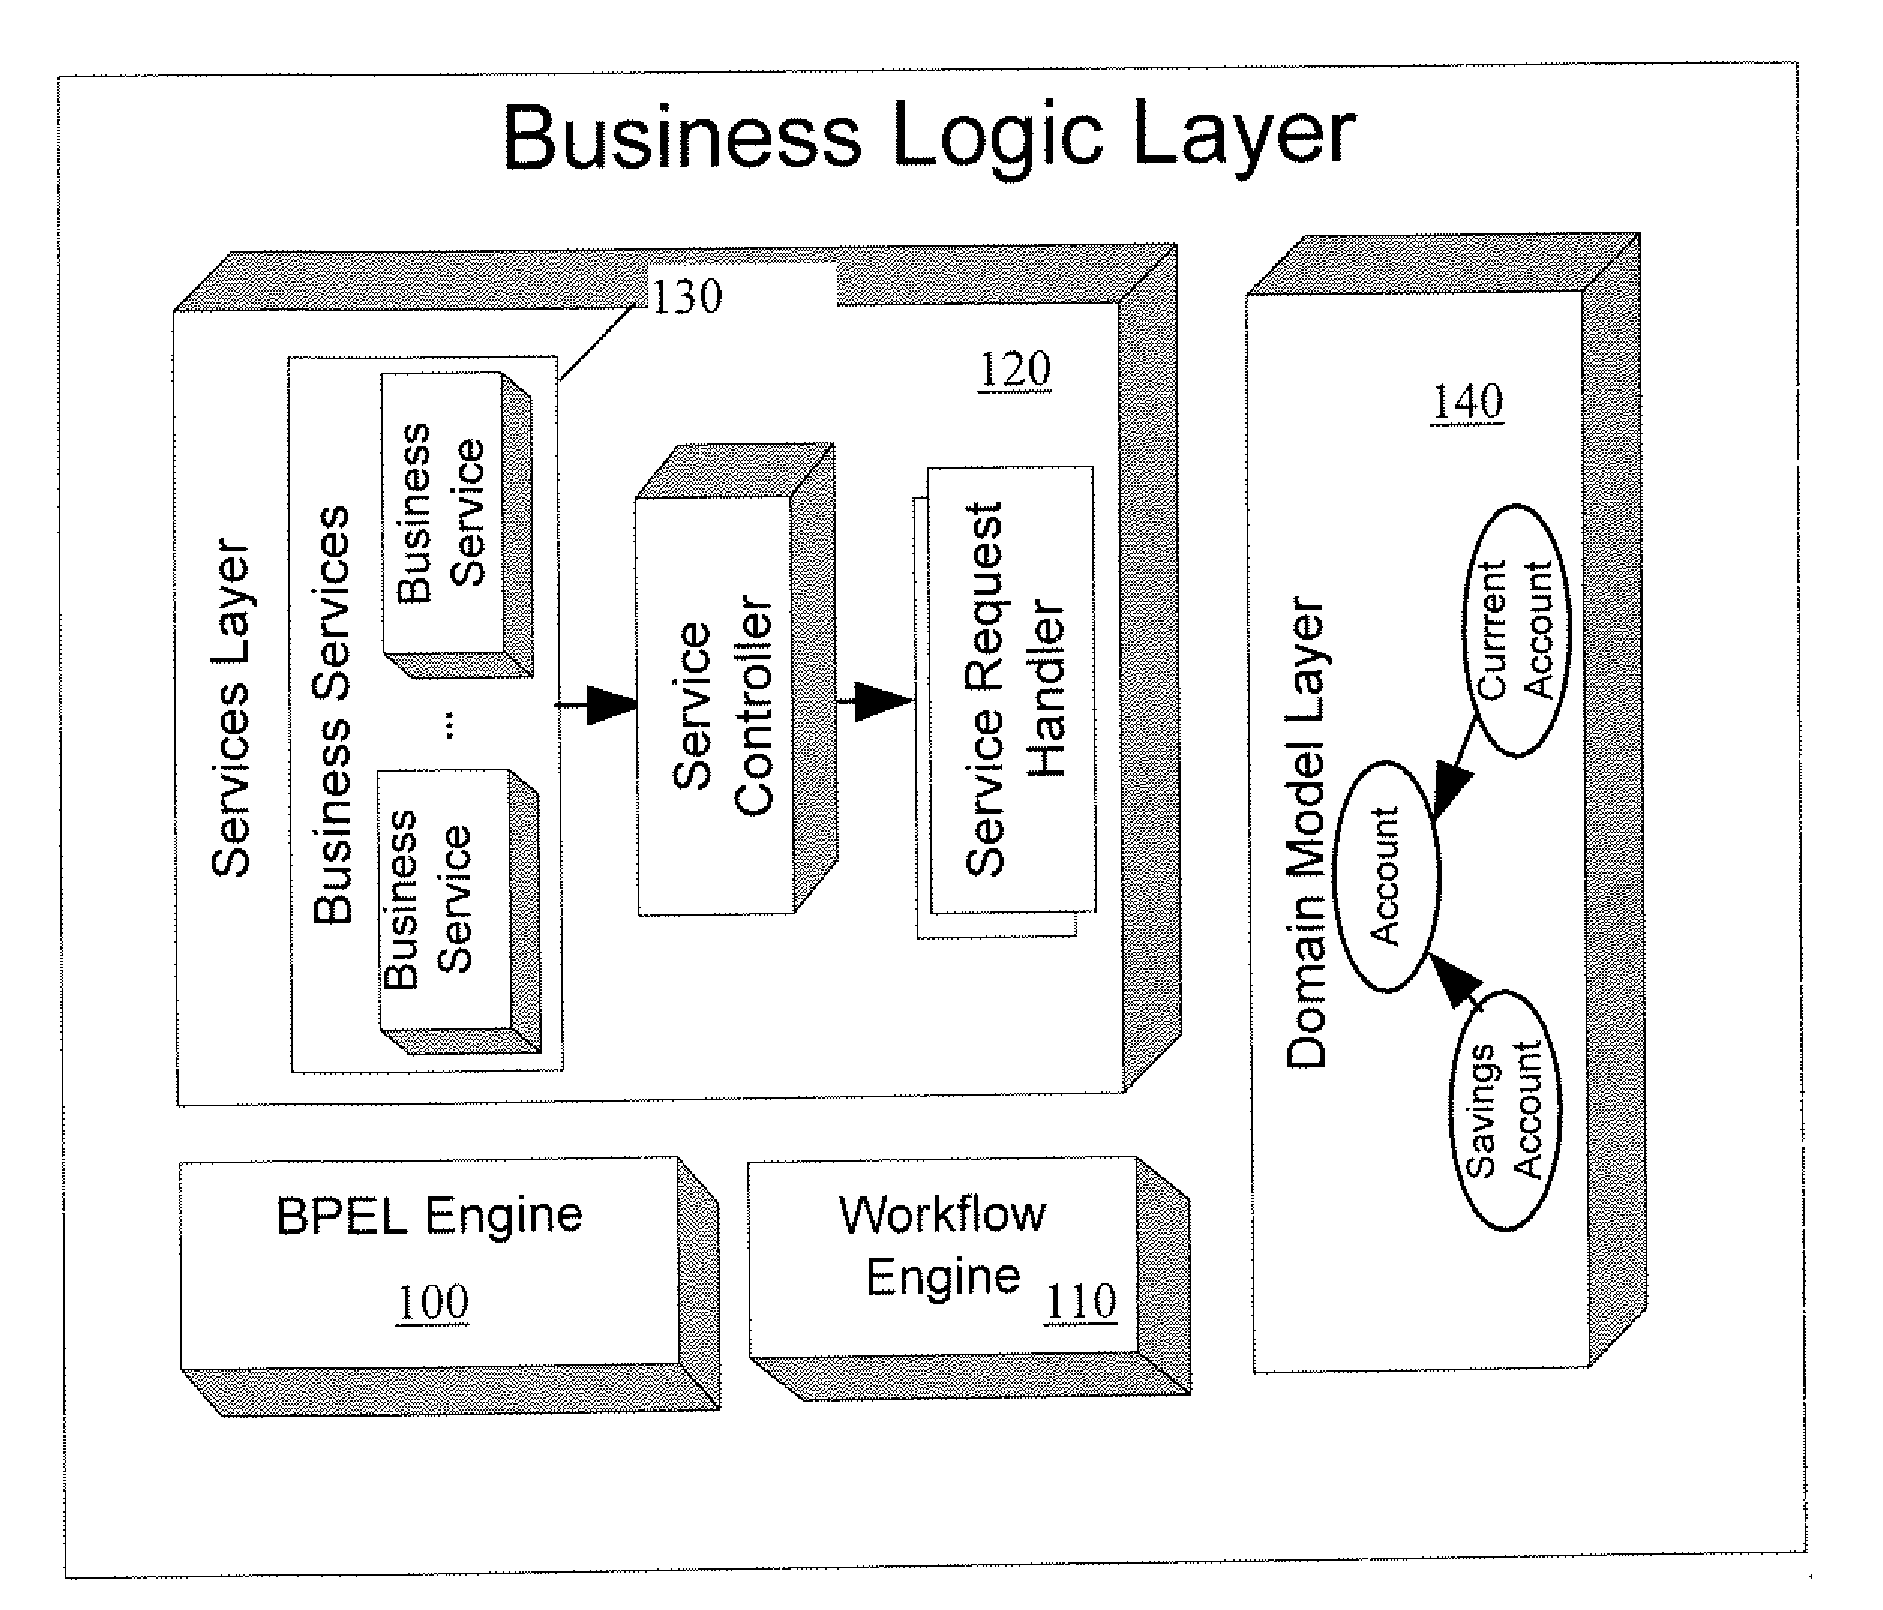 Method for handling cross-cutting concerns at business level